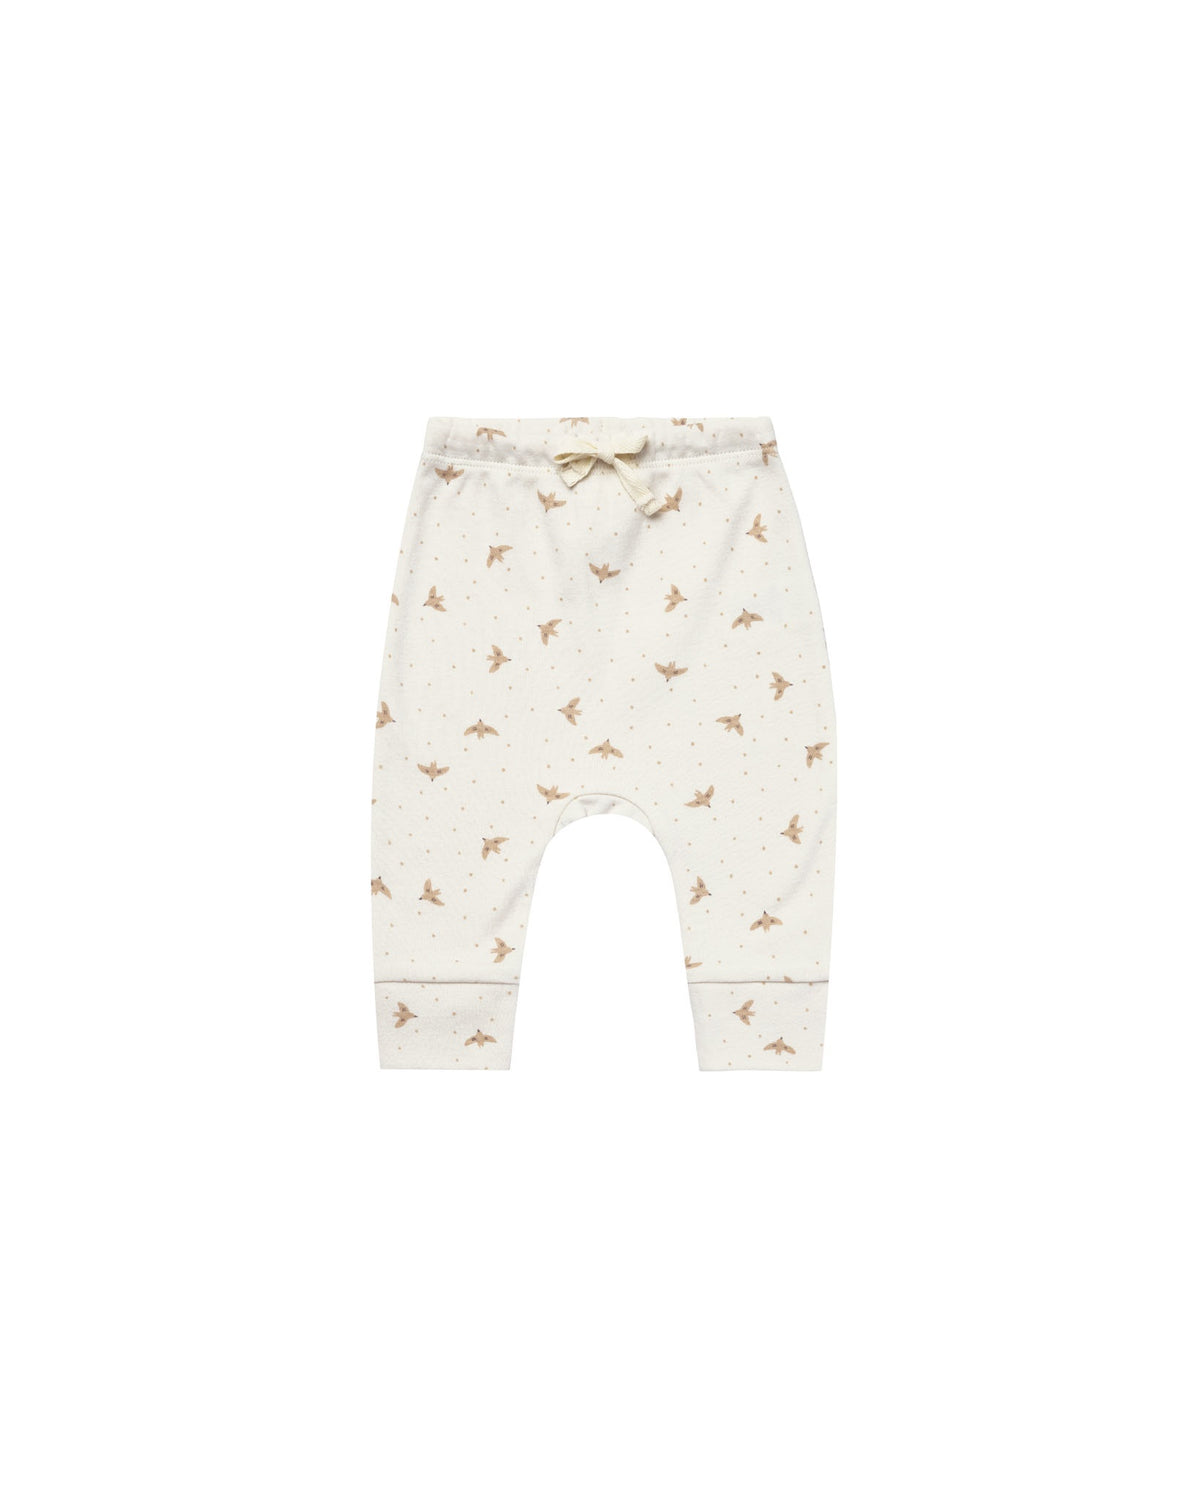 Quincy Mae Drawstring Pants Doves